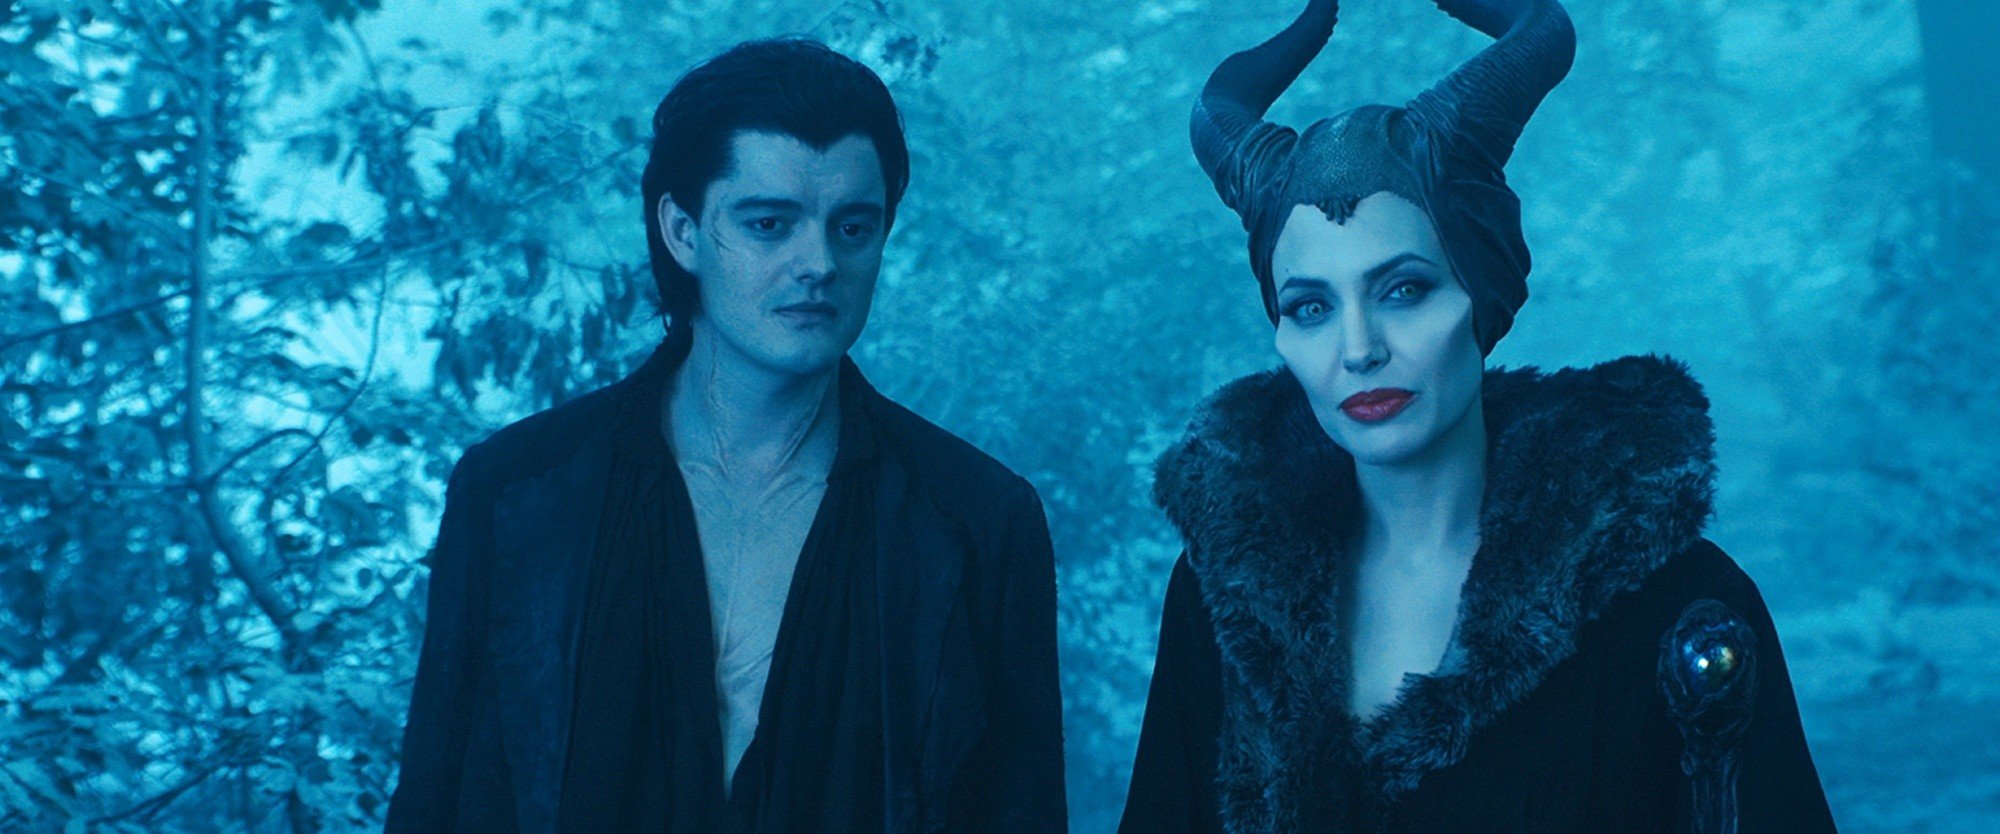 Sam Riley stars as Diaval and Angelina Jolie stars as Maleficent in Walt Disney Pictures' Maleficent (2014)